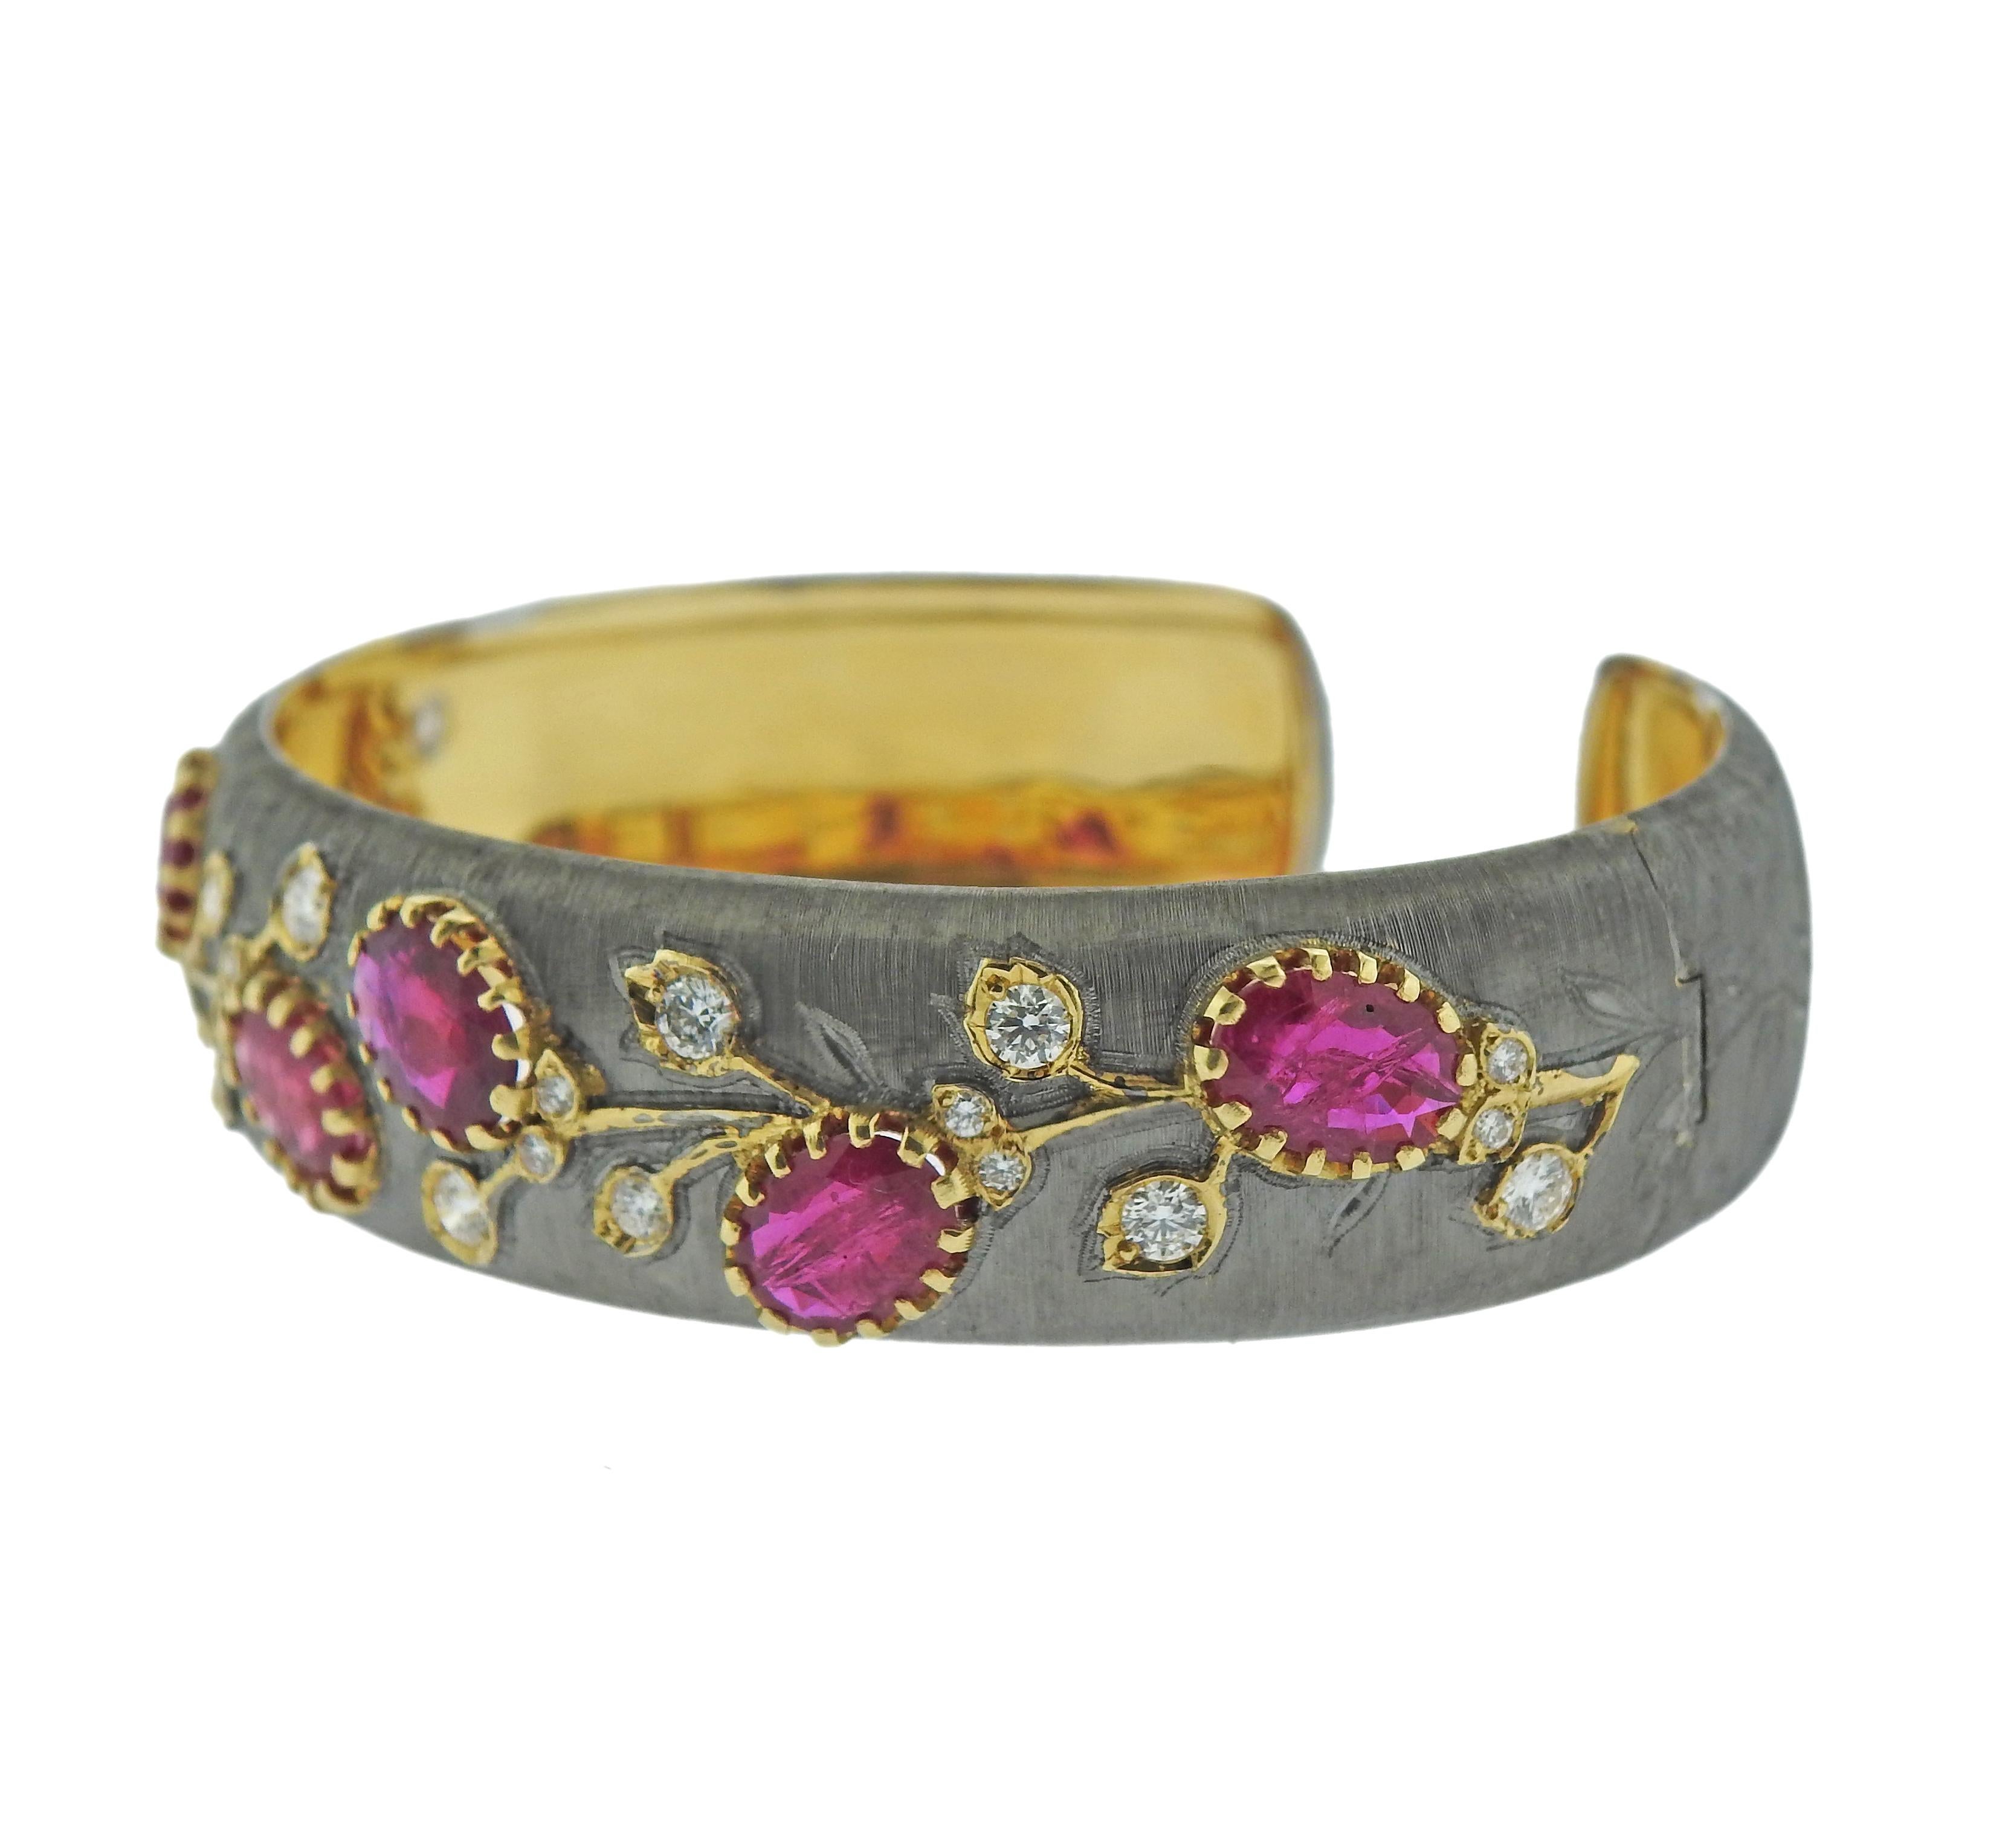 18k yellow and white brushed gold cuff bracelet, set with vibrant rubies and approx. 0.90ctw in diamonds. Bracelet will fit approx. 7